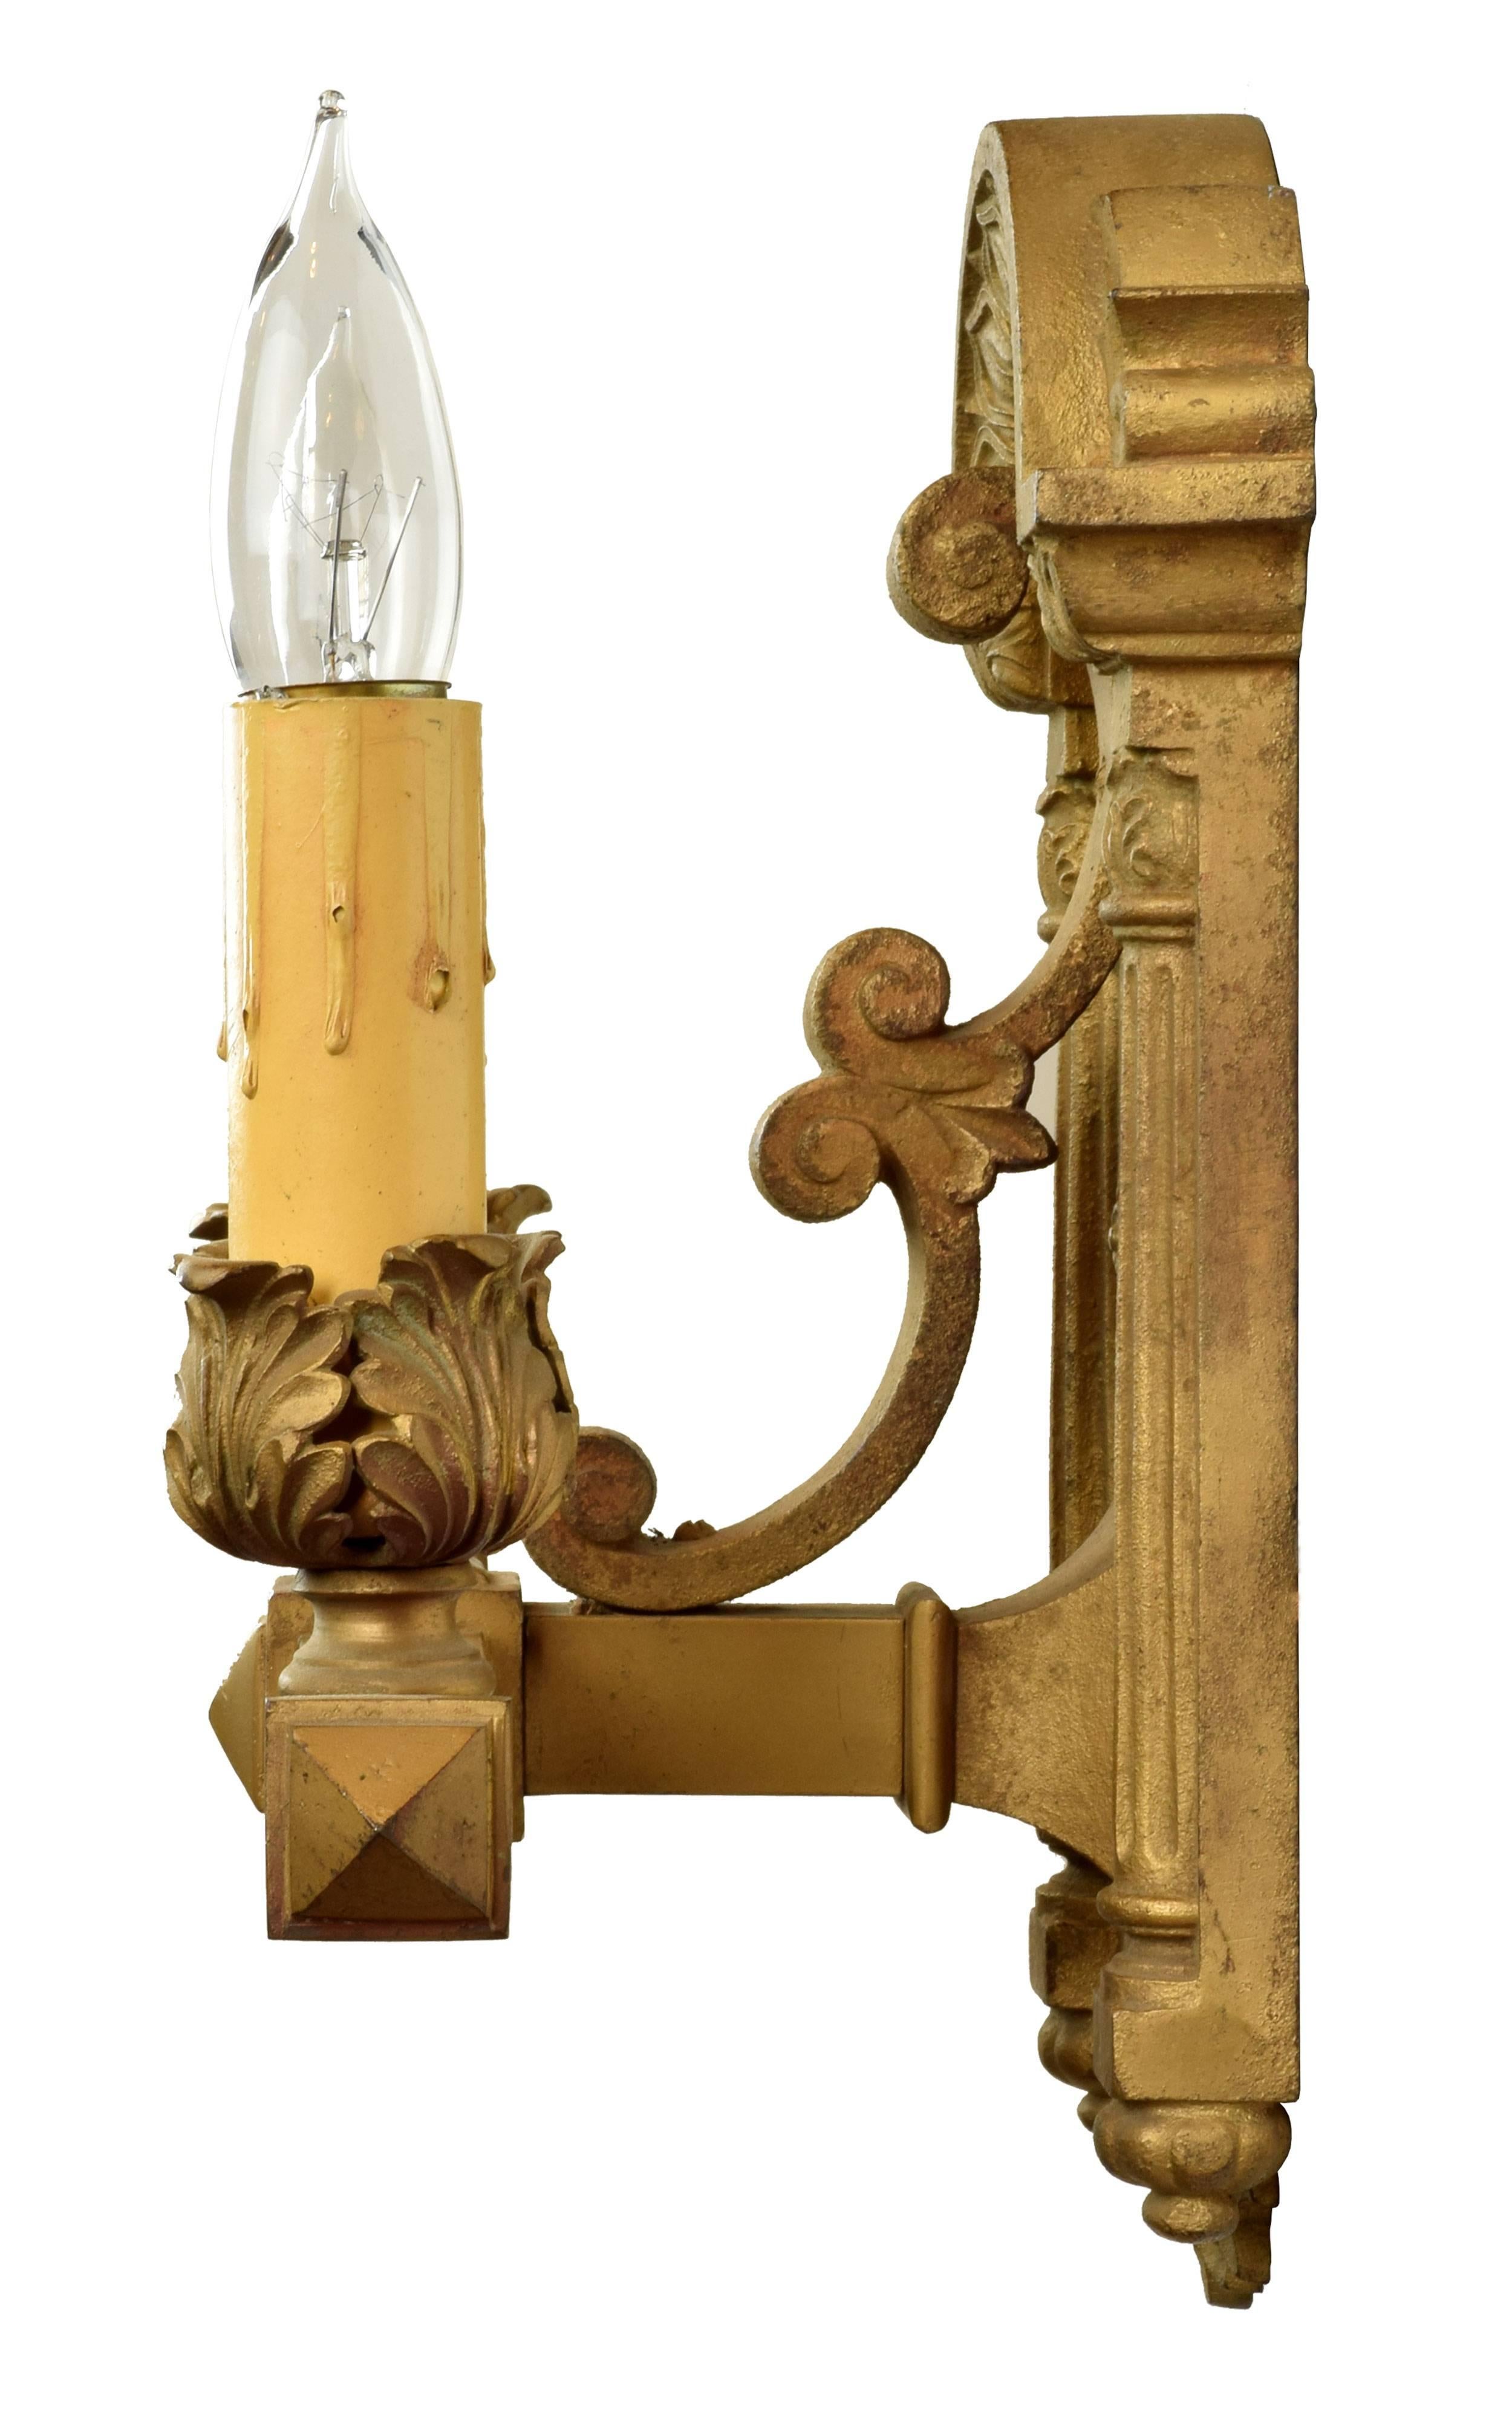 Straight, angular lines are juxtaposed beautifully with curving, leafy designs in this pair of heavy cast iron sconces. A beautiful golden finish adds a luxurious richness to each piece. 

Two medium sockets

We find that early antique lighting